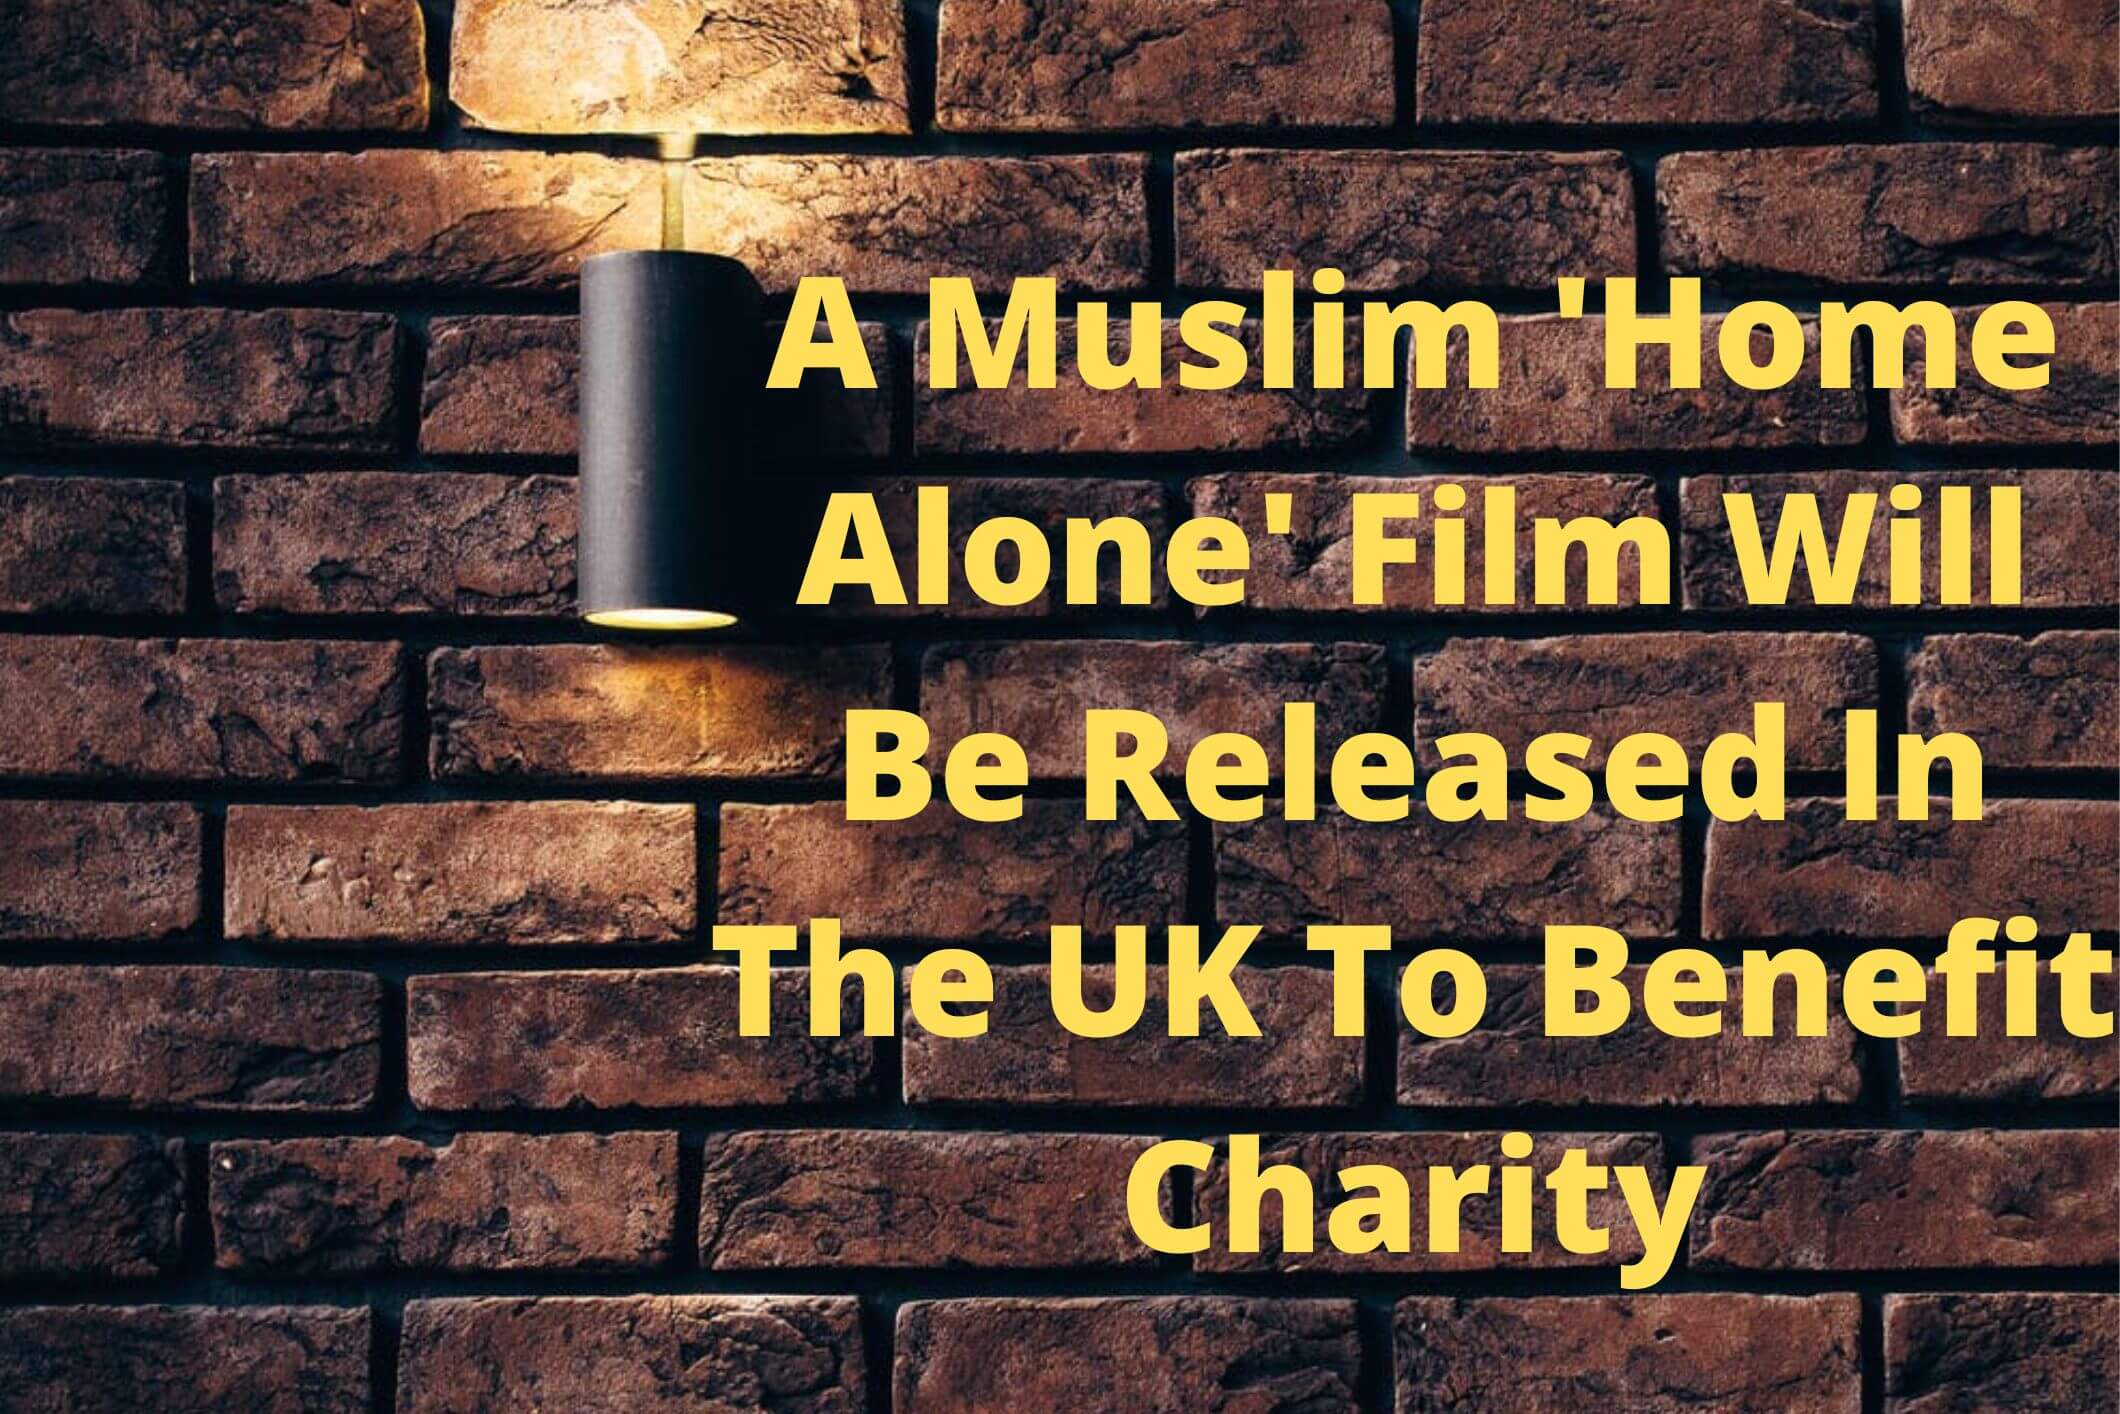 A Muslim 'Home Alone' Film Will Be Released In The UK To Benefit Charity